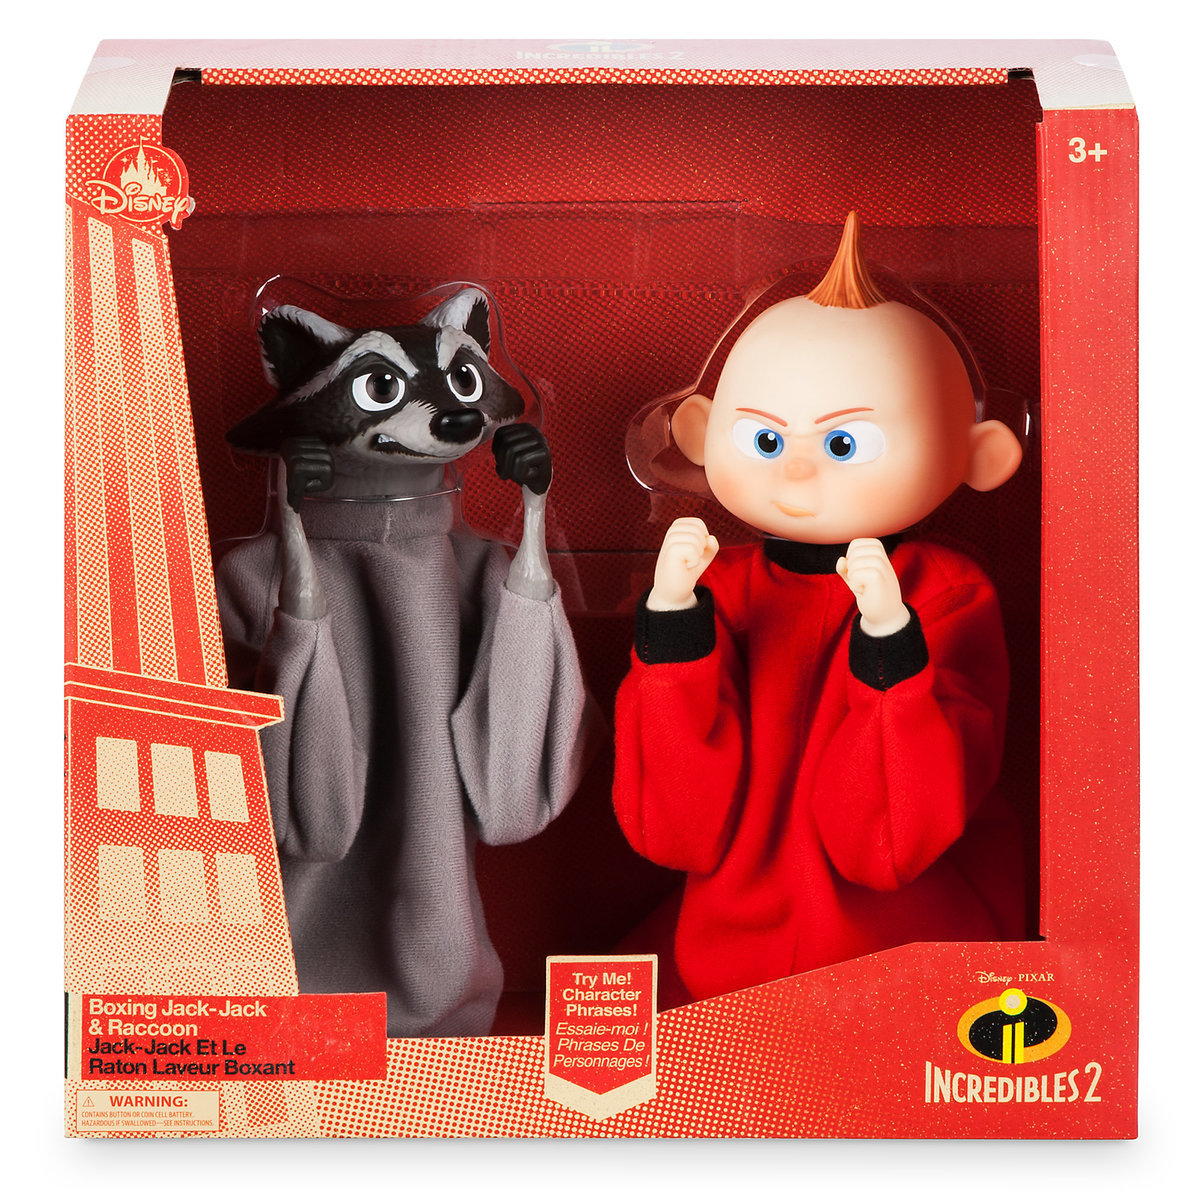 Disney Store Jack-Jack and Raccoon Boxing Puppet Set Incredibles 2 New With Box